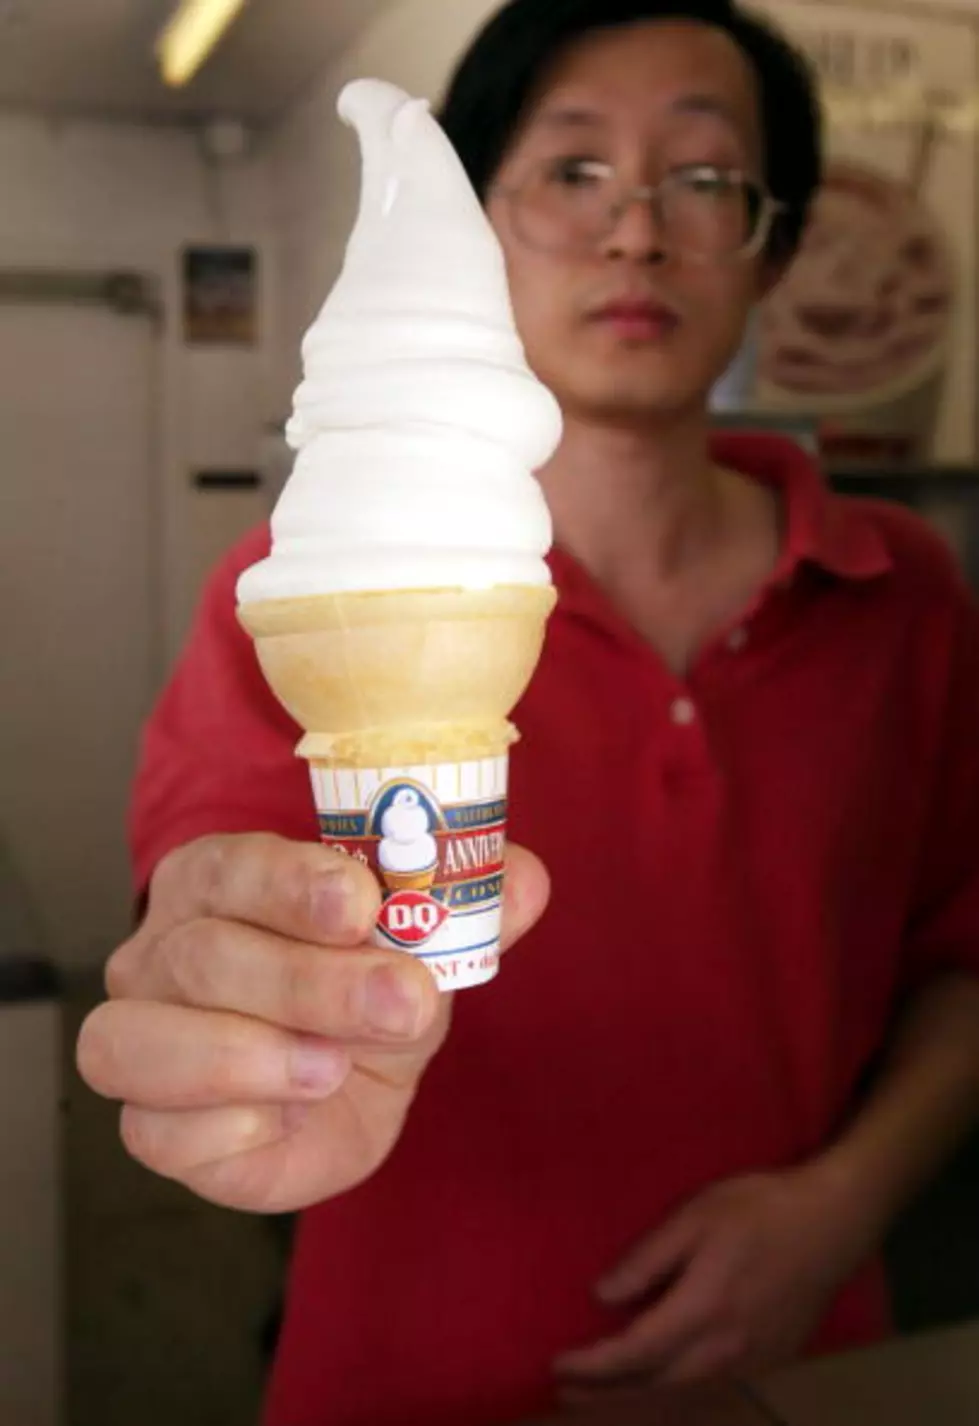 Dairy Queen Offers Miracle Treats Today – What Other Closed Businesses Do You Miss